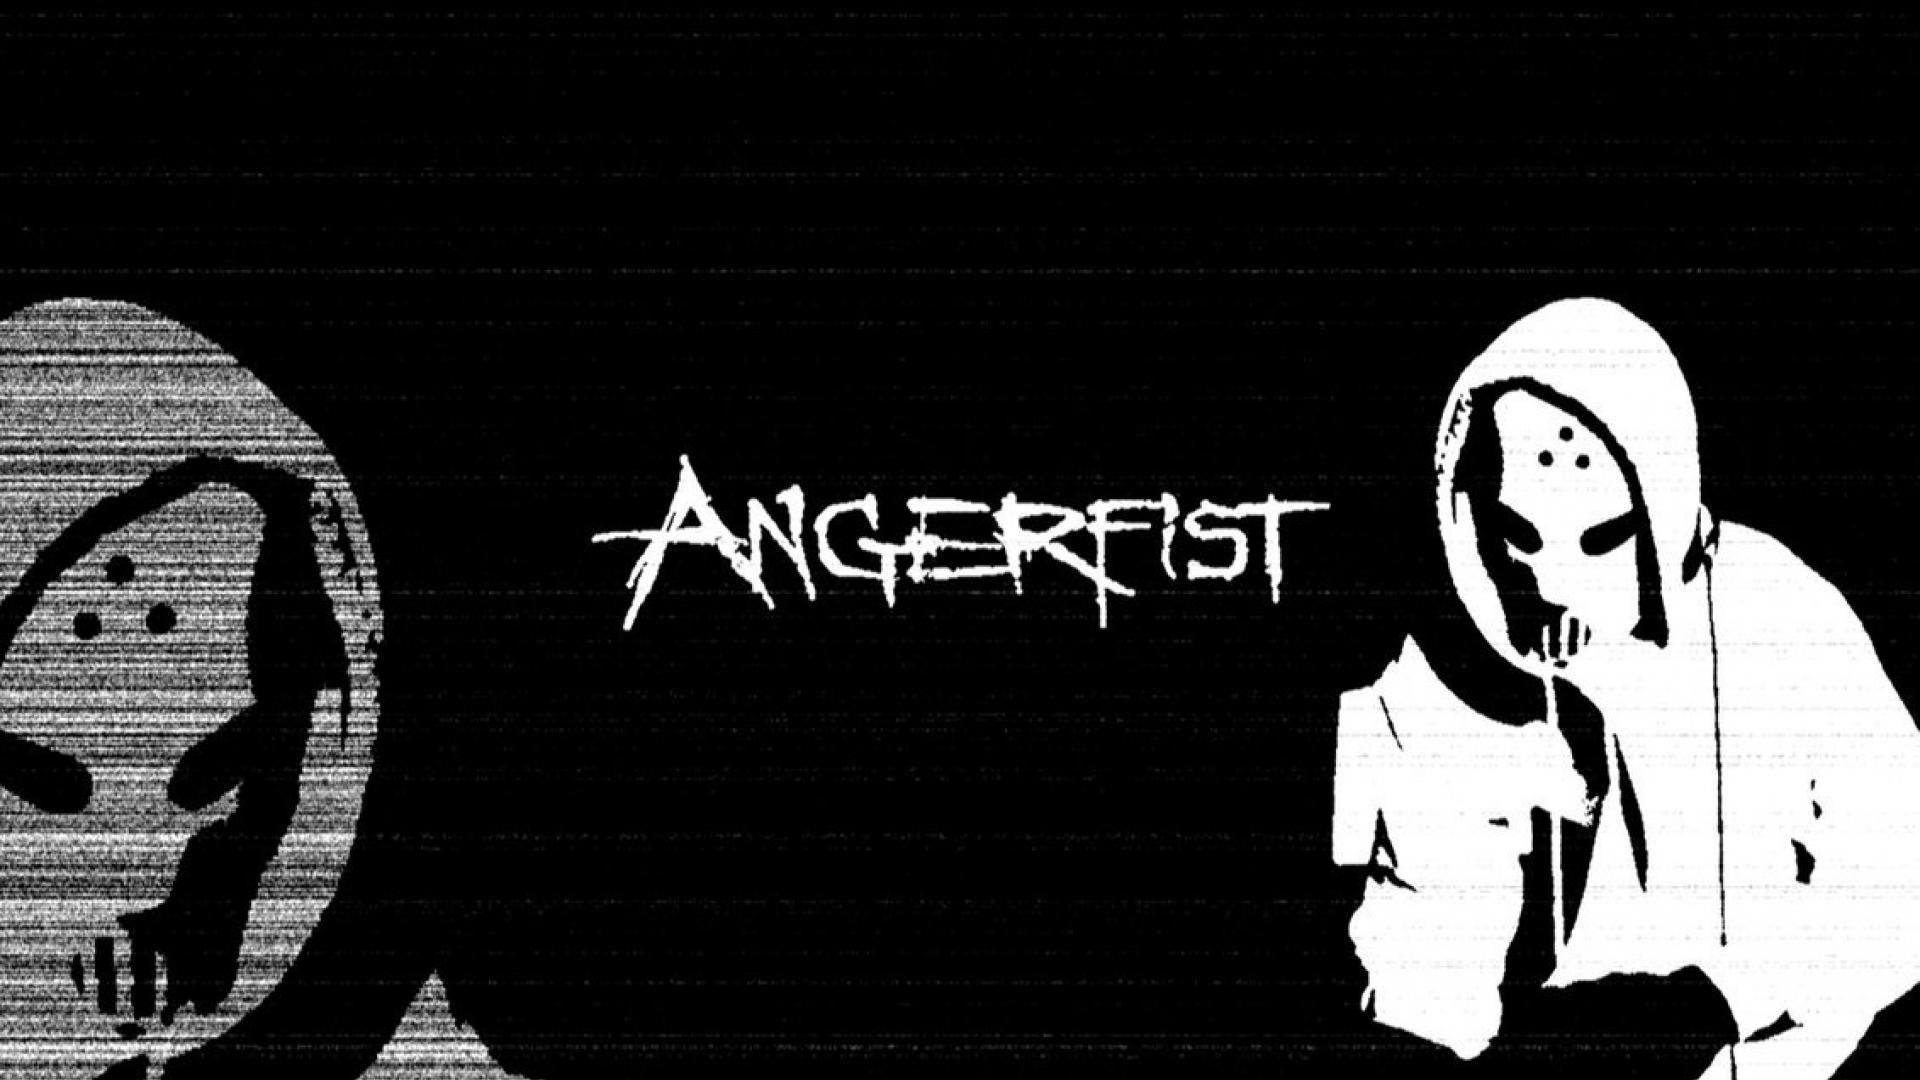 Top Collection of Angerfist Wallpaper, Angerfist Wallpaper, Pack